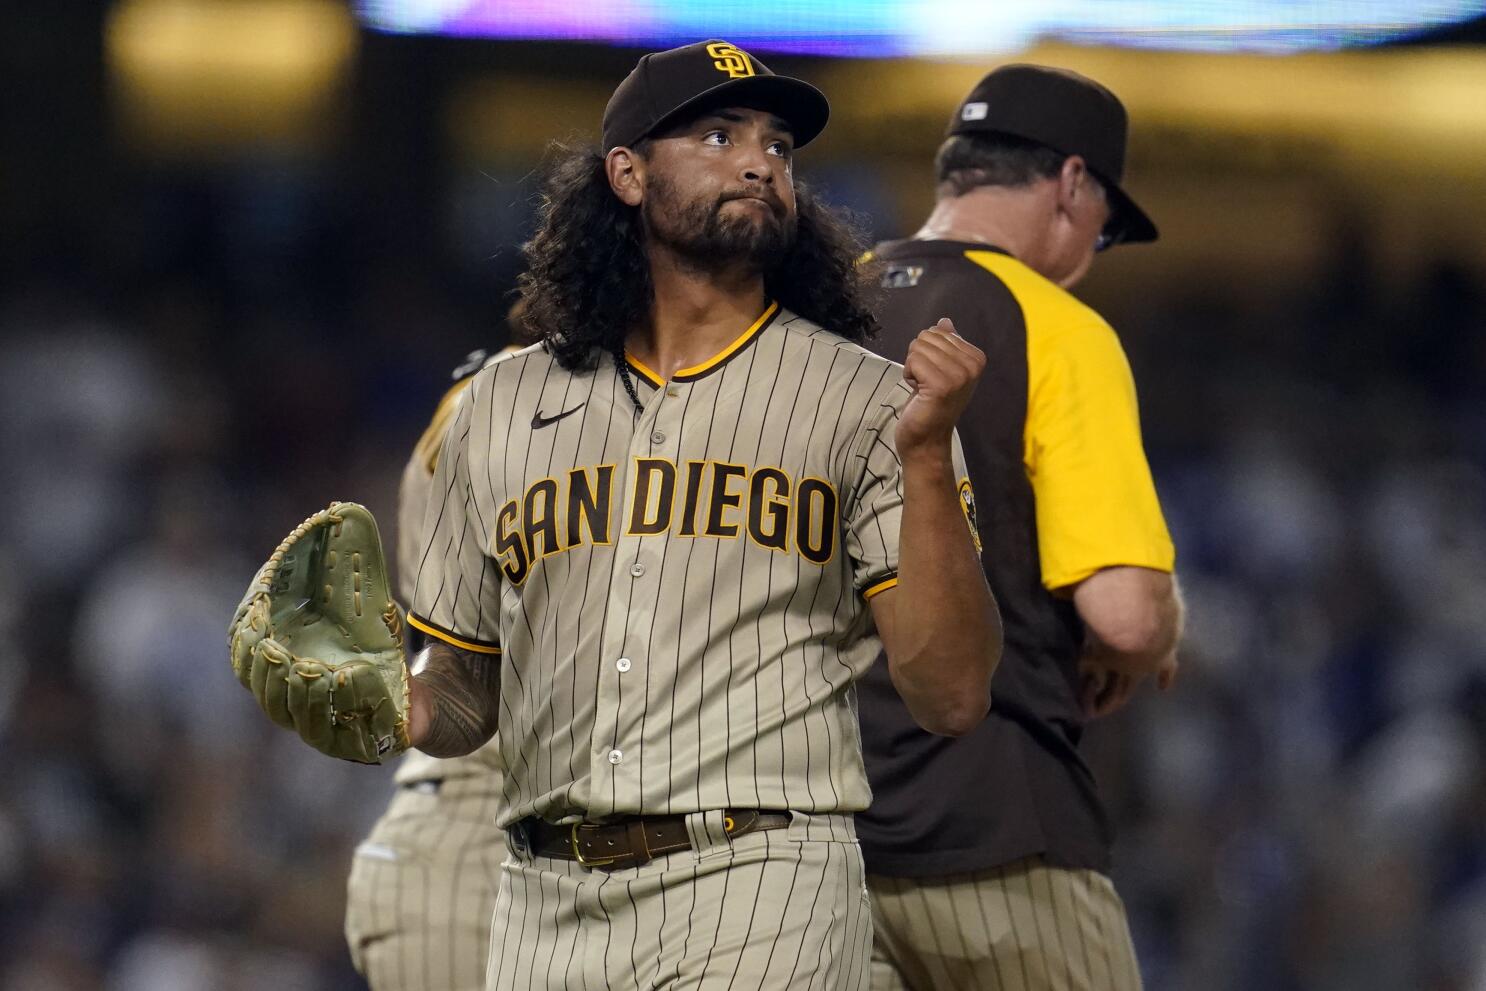 New Padres pitcher Sean Manaea faces A's on same day as trade